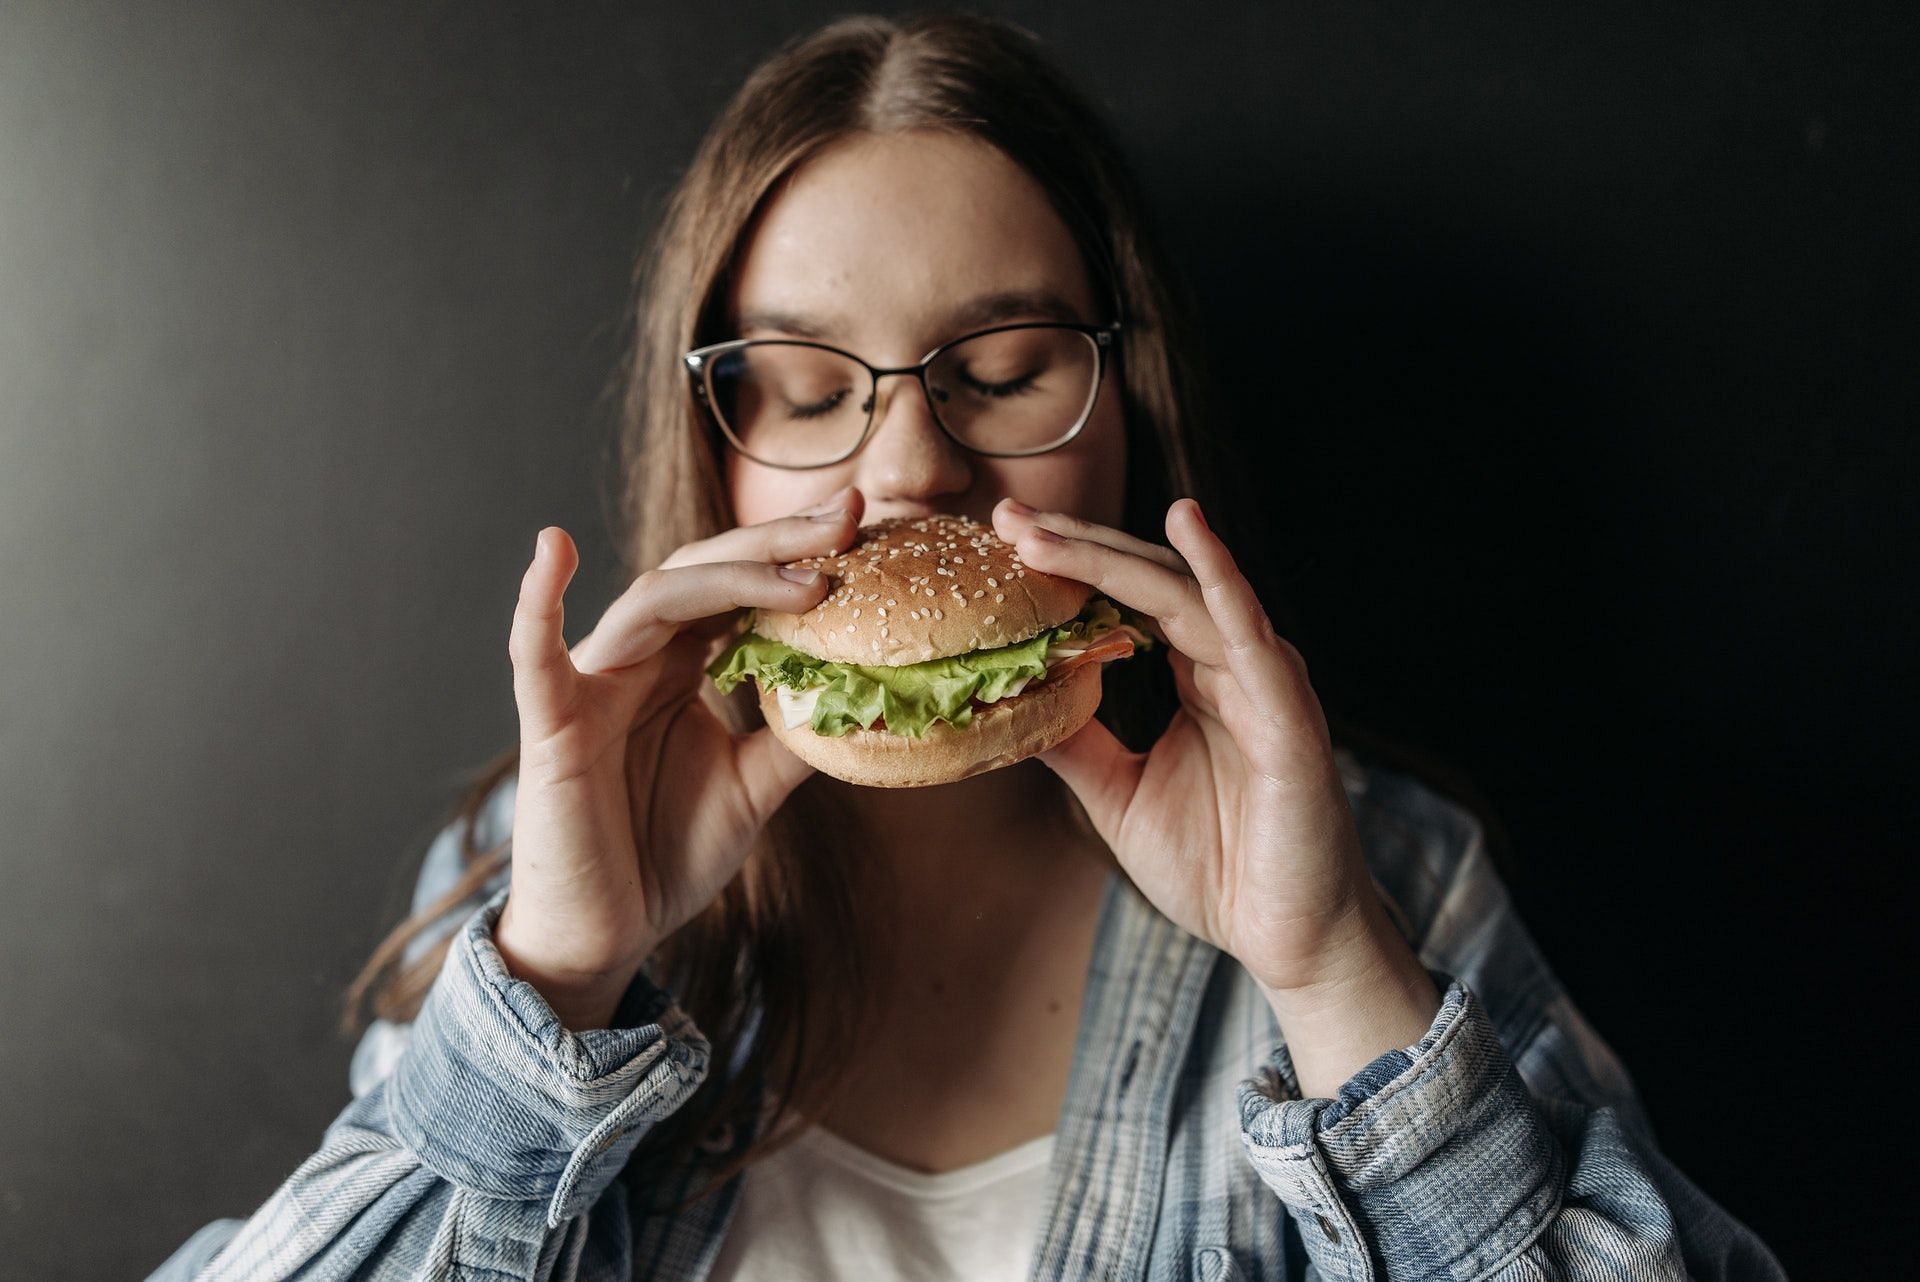 How do you gain weight? (Image via Pexels/Photo by Pavel Danilyuk)